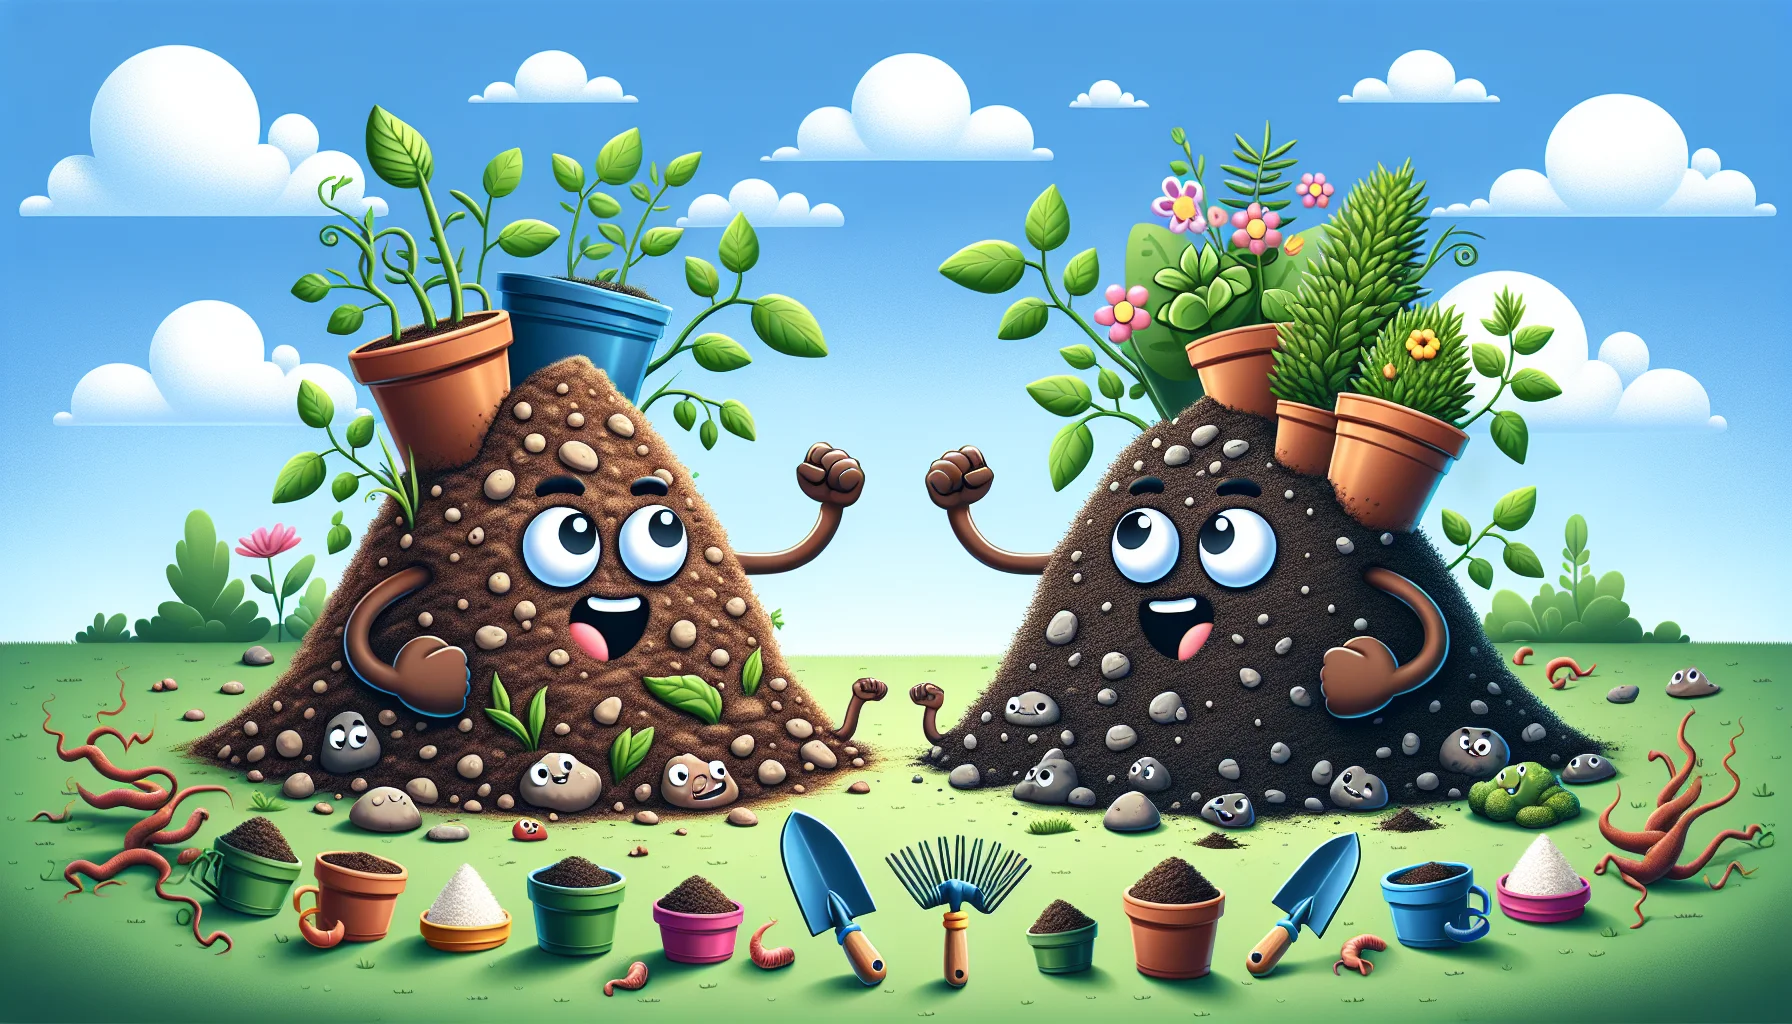 Generate a playful and humorous scene set outdoors, where two animated mounds of soil are depicted as engaging characters in a friendly competition. The one on the left represents garden soil, depicted with a rugged, robust quality, scattered with small rocks, and sprouting with weeds and worms. The mound on the right, representing potting soil, is shown as pile of fluffier, richer soil, embroidered with small white particles of perlite, and sprouting lush, healthy plants. Surround them with vibrant garden tools and plants cheering like a crowd, promoting a joyful atmosphere of gardening.